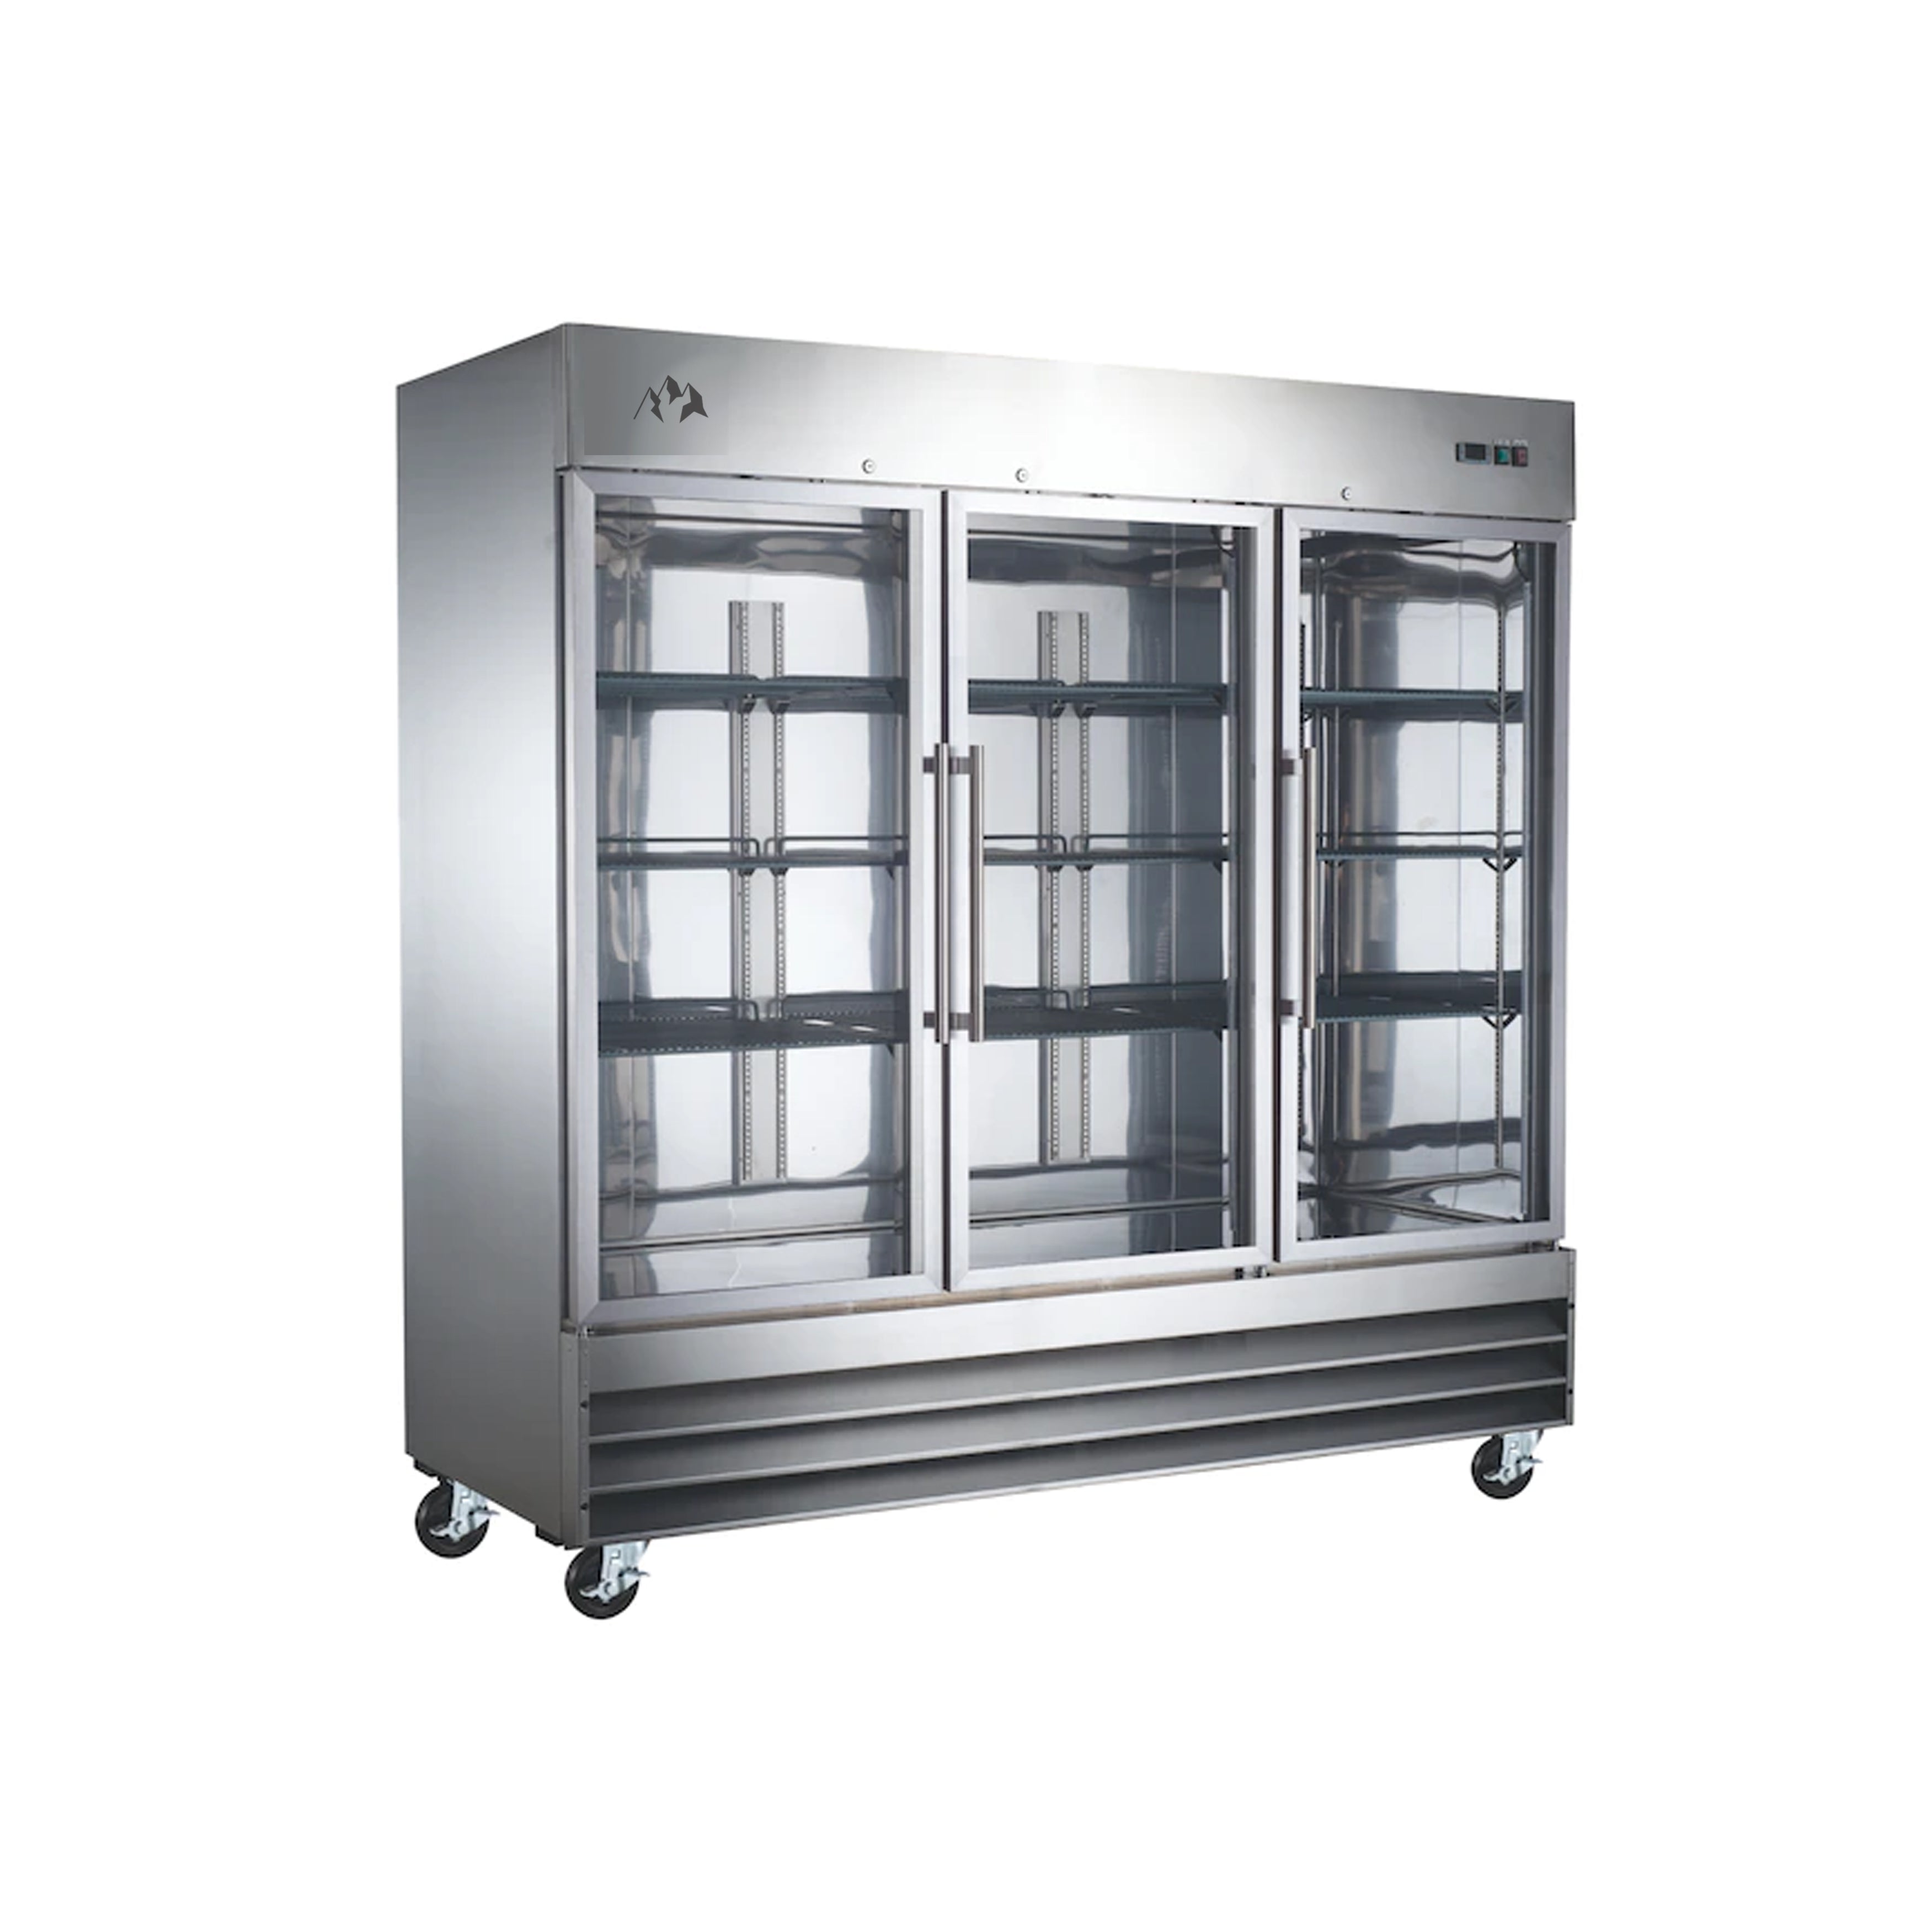 Chef AAA - SS-3R-G-HC, Commercial 80" Reach-In Refrigerator Stainless Steel Glass Door 72 cu.ft.